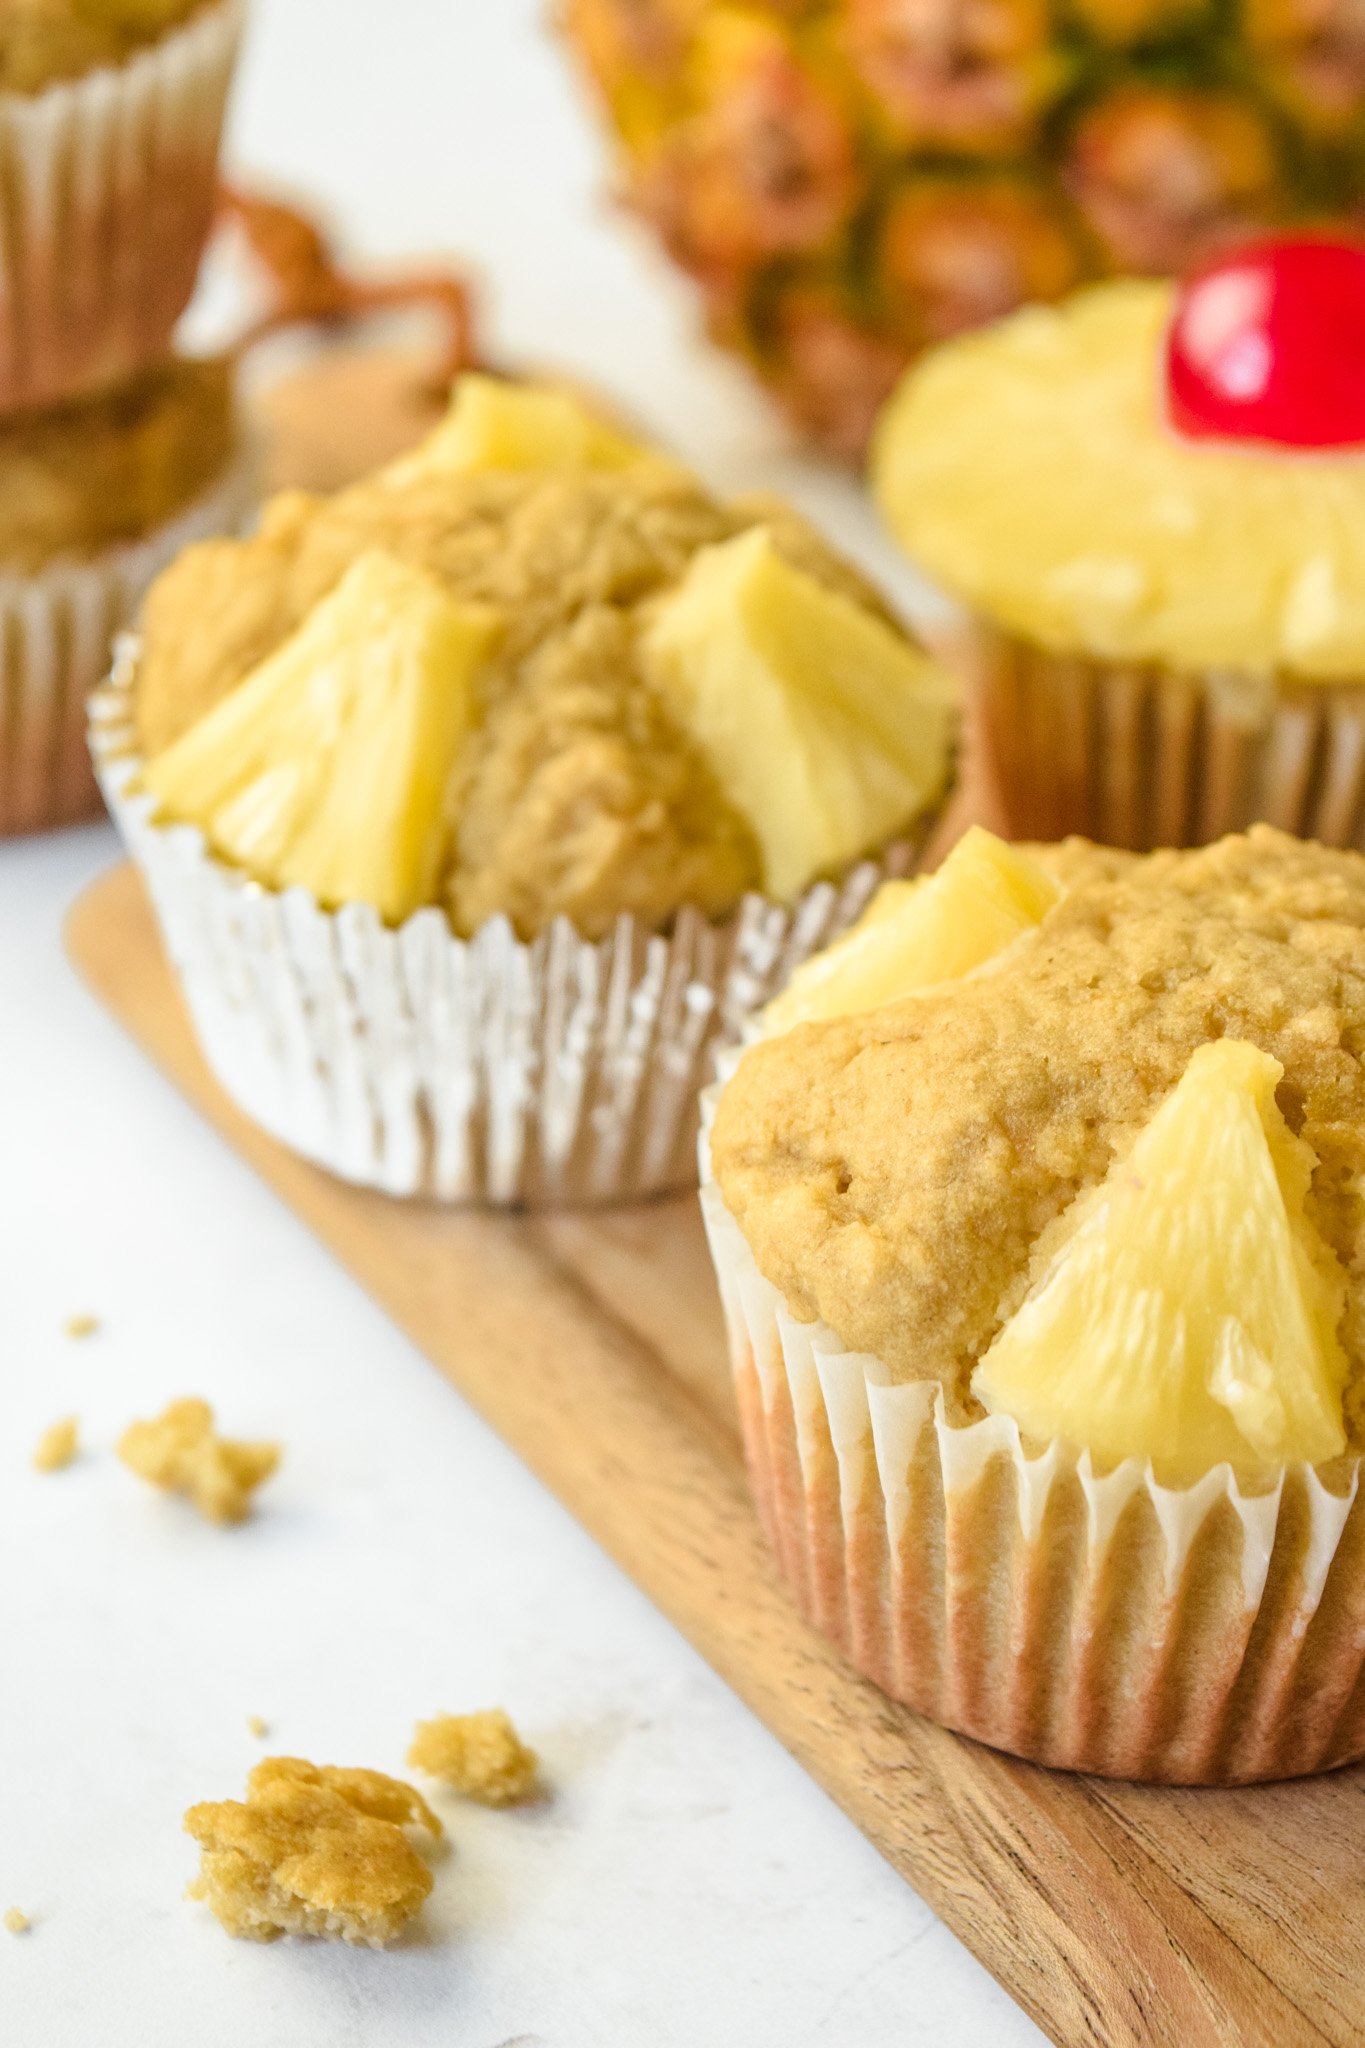 Gluten Free Pineapple Muffins with Canned Pineapple